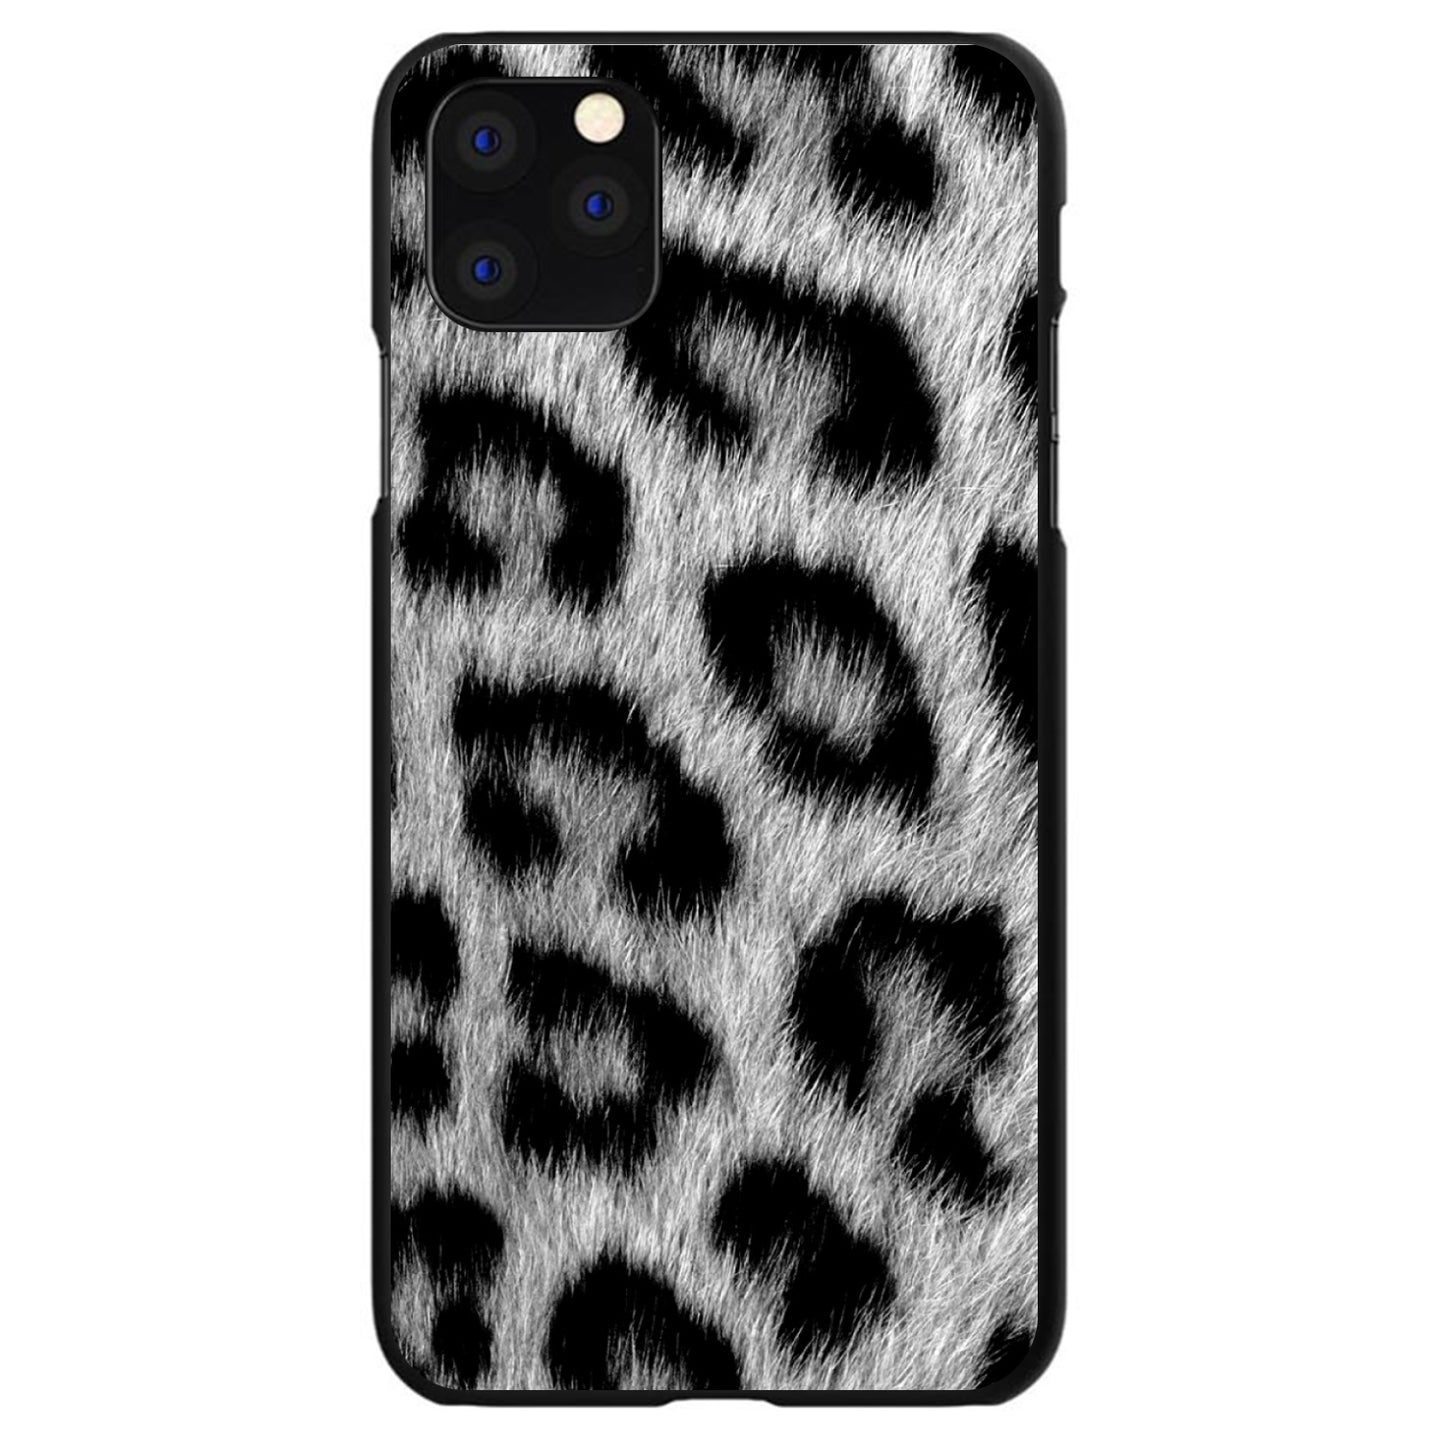 DistinctInk® Hard Plastic Snap-On Case for Apple iPhone or Samsung Galaxy - Black White Snow Leopard Fur